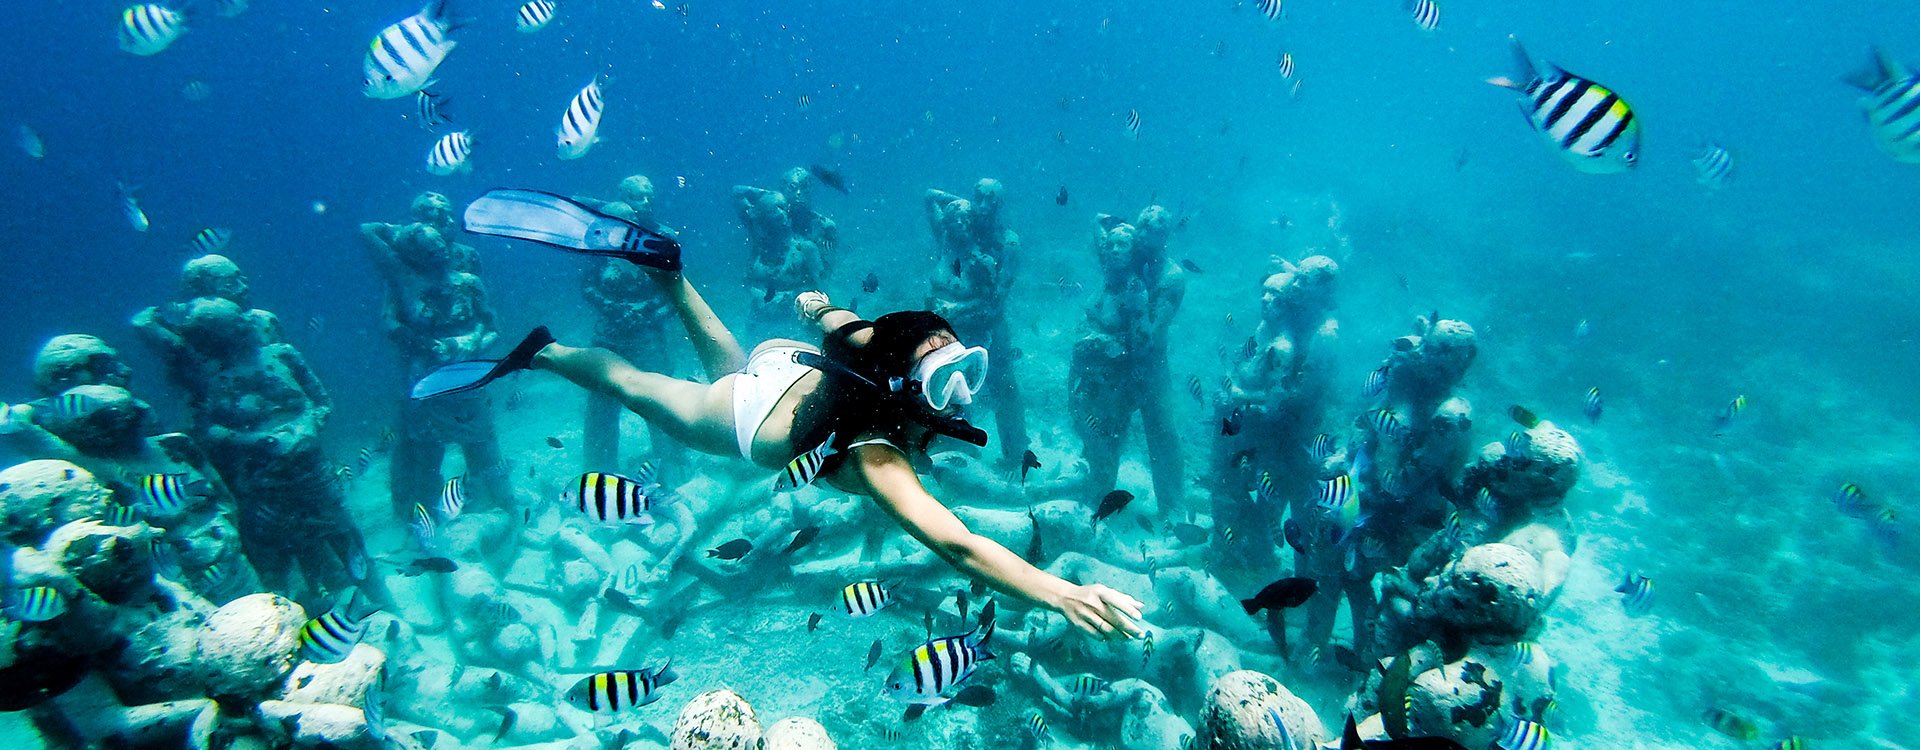 Snorkel woman swimming in a turquoise ocean under the flooded statues. Free diving.